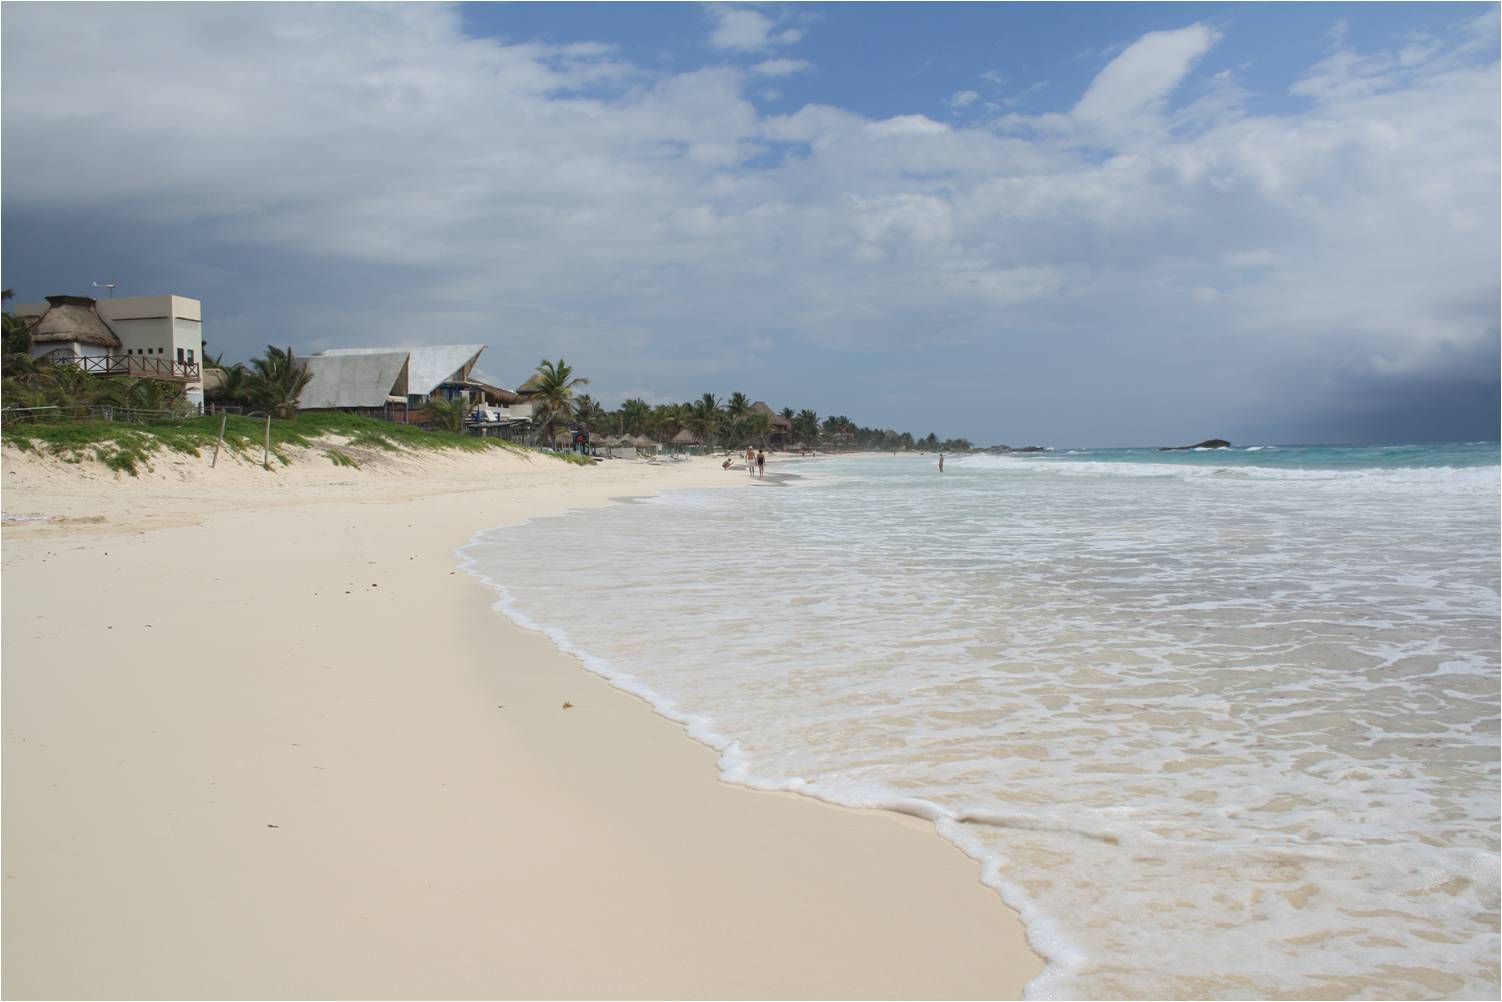 Small hotels at the white sandy beach of Tulum...